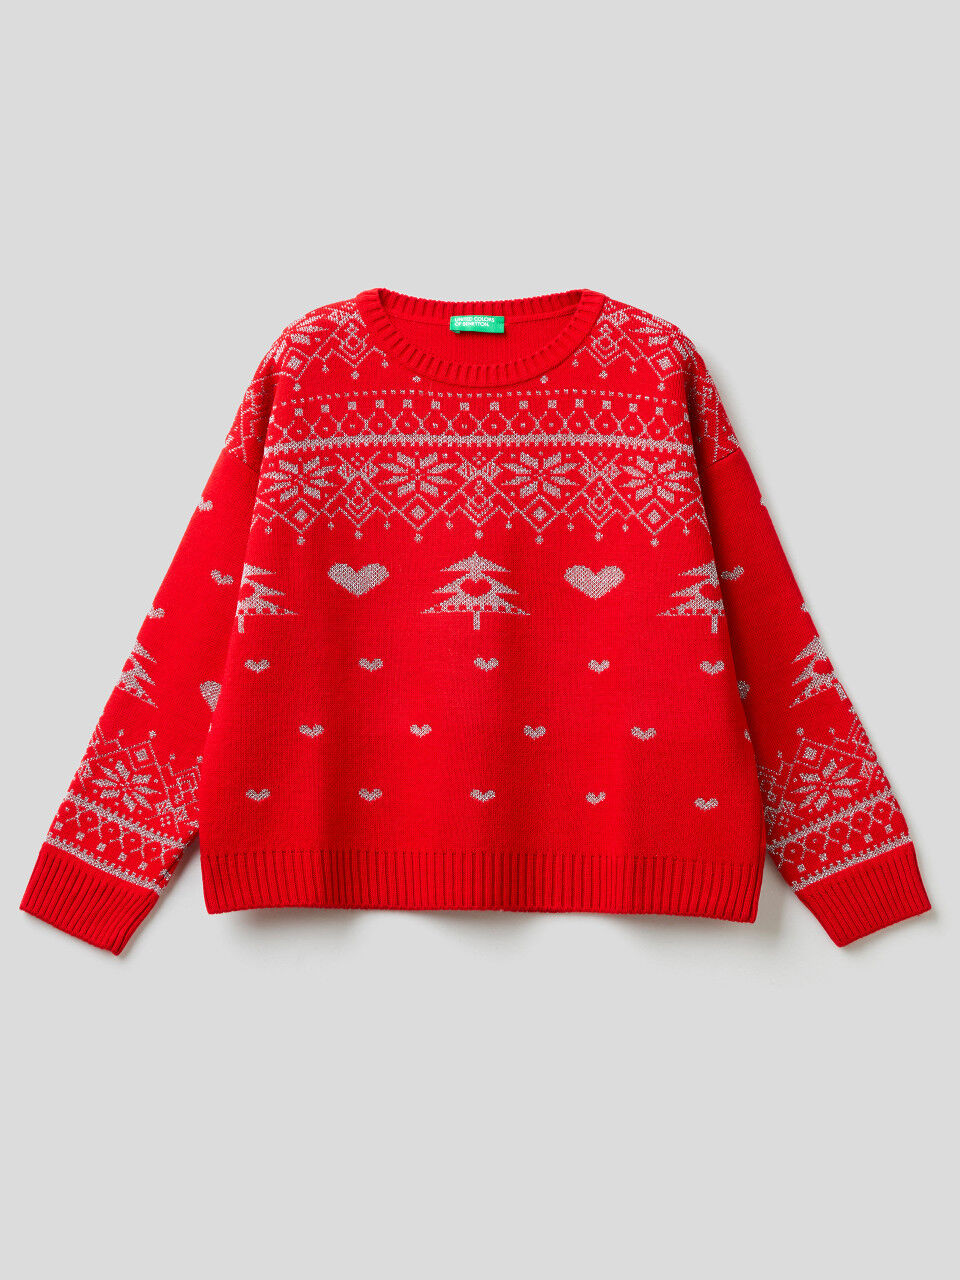 Sweater with Christmas inlays